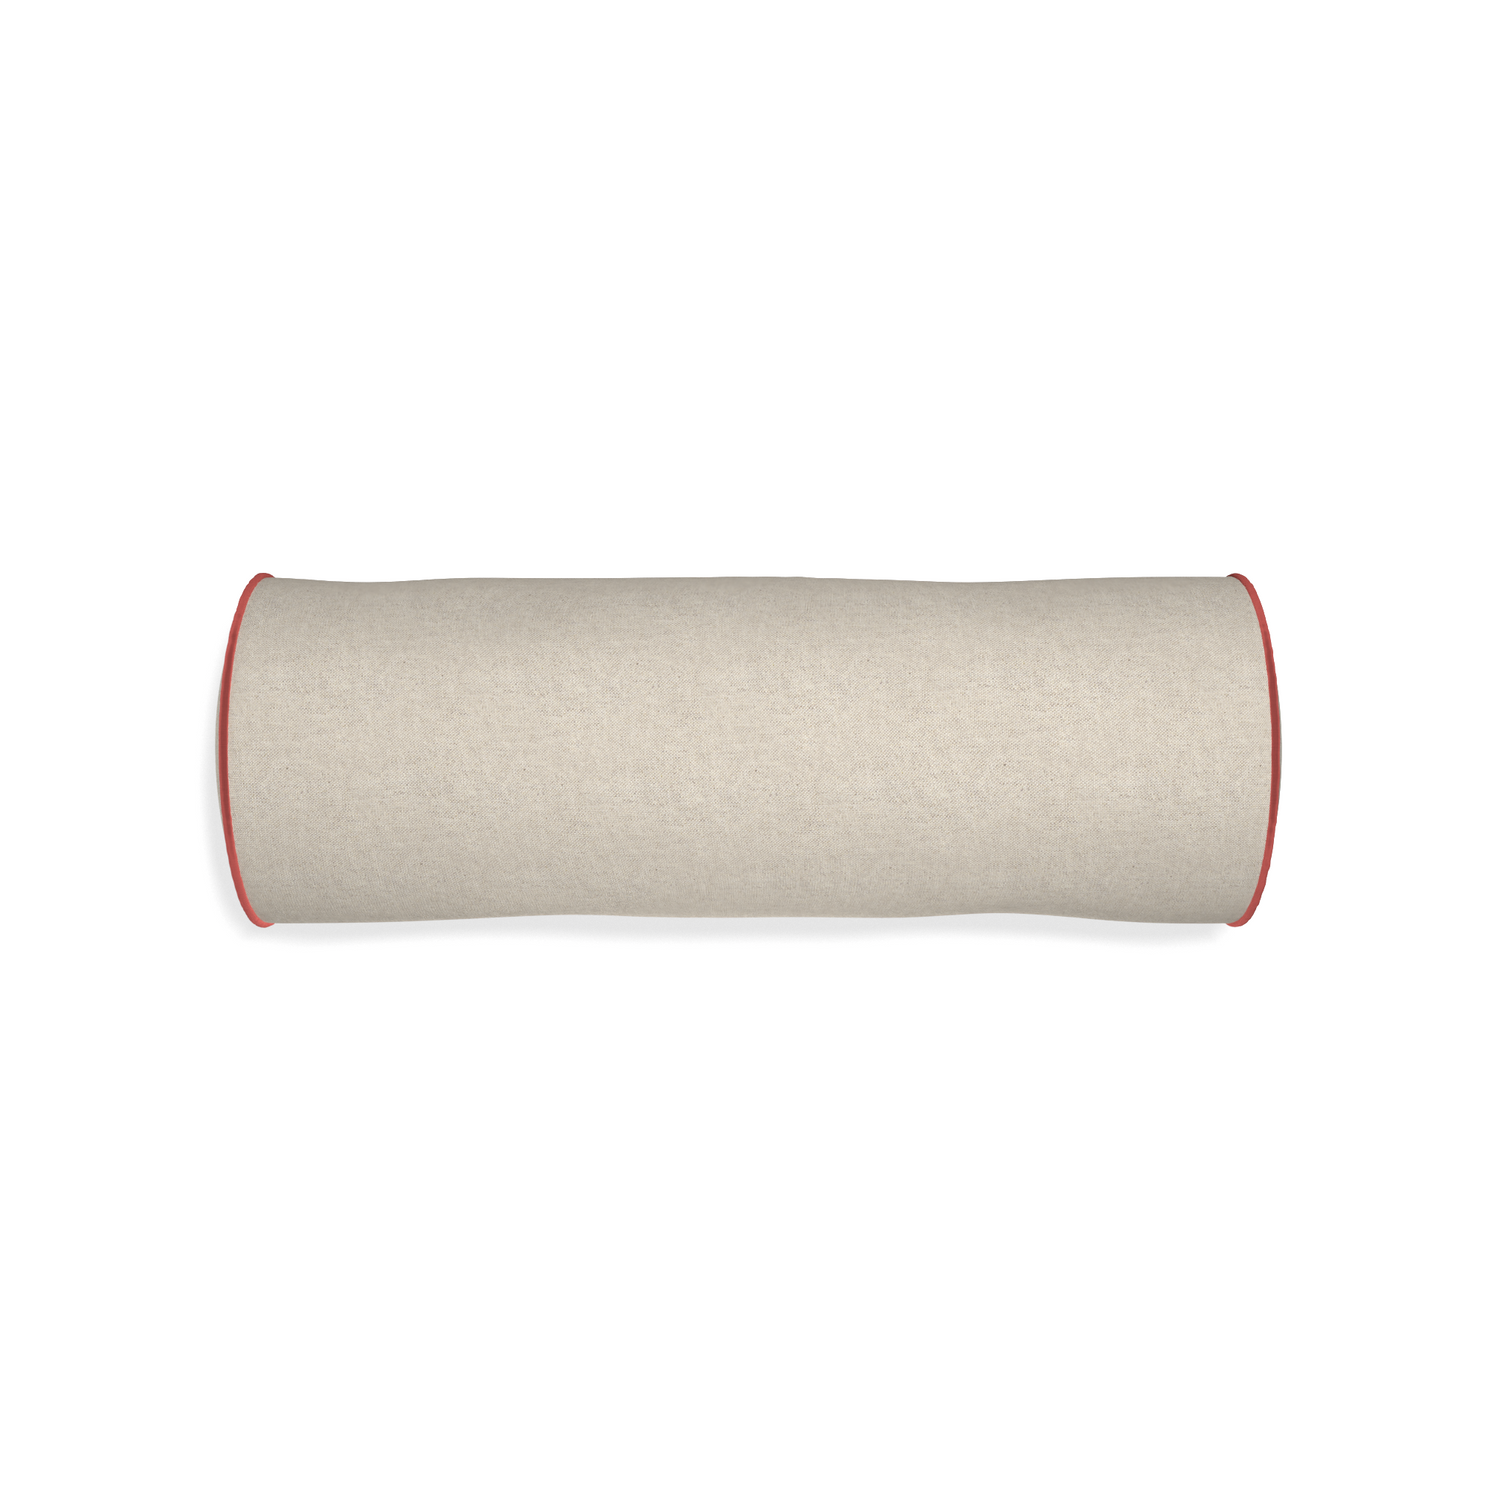 Bolster oat custom light brownpillow with c piping on white background